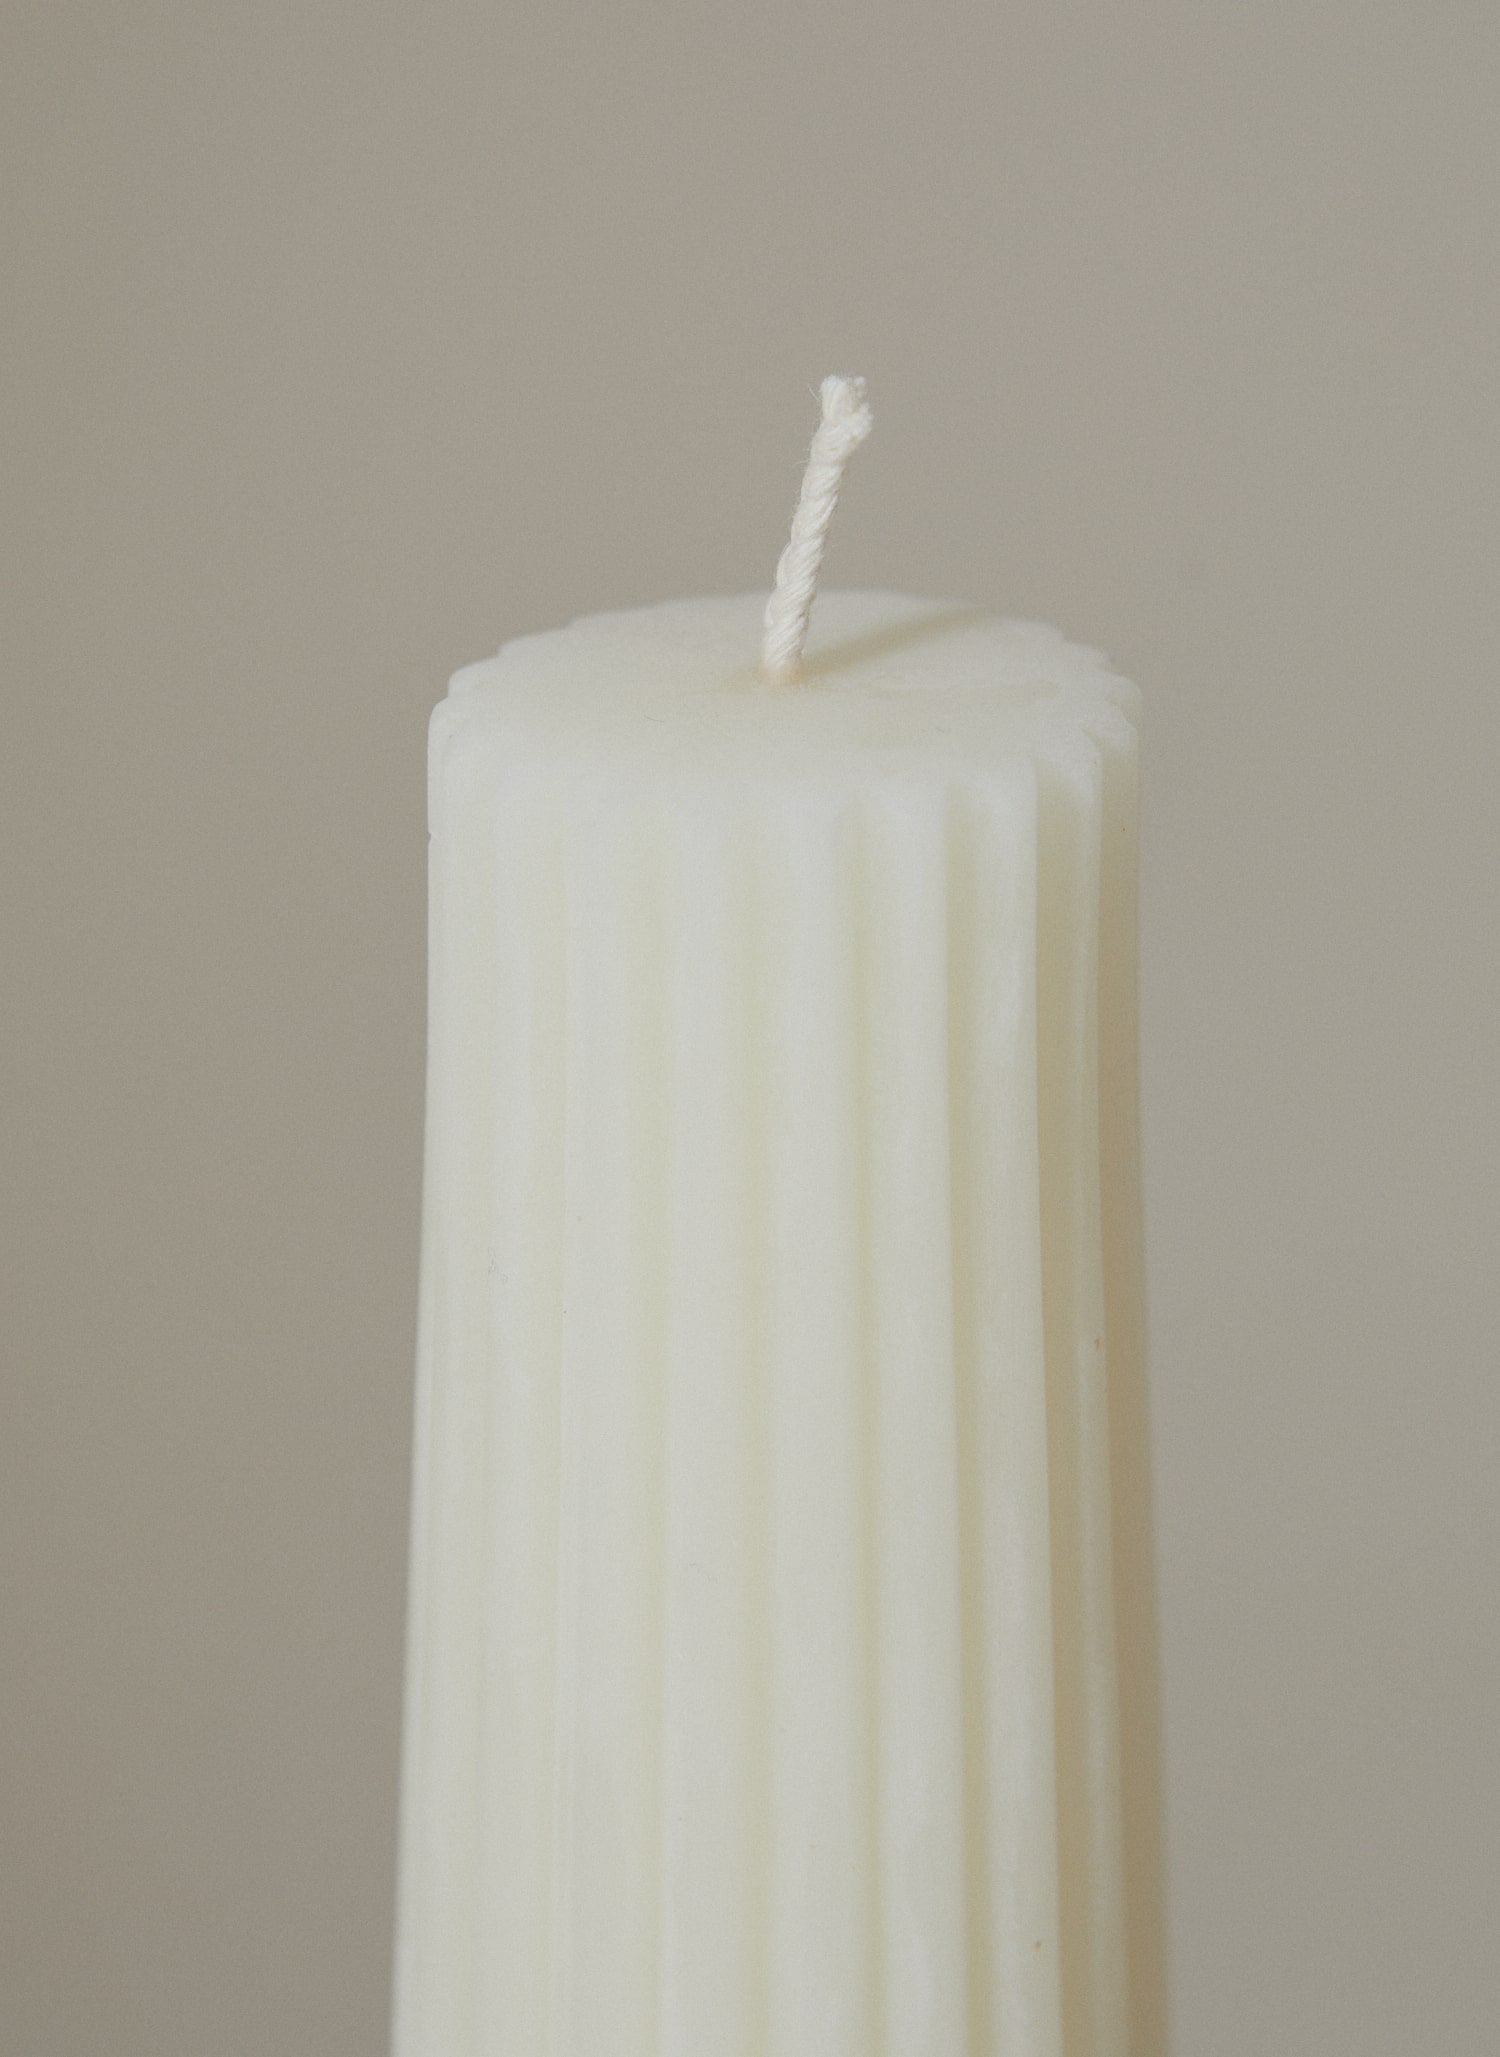 Close up of cotton wick on Greentree Home Cream Textured beeswax Pillar candle.